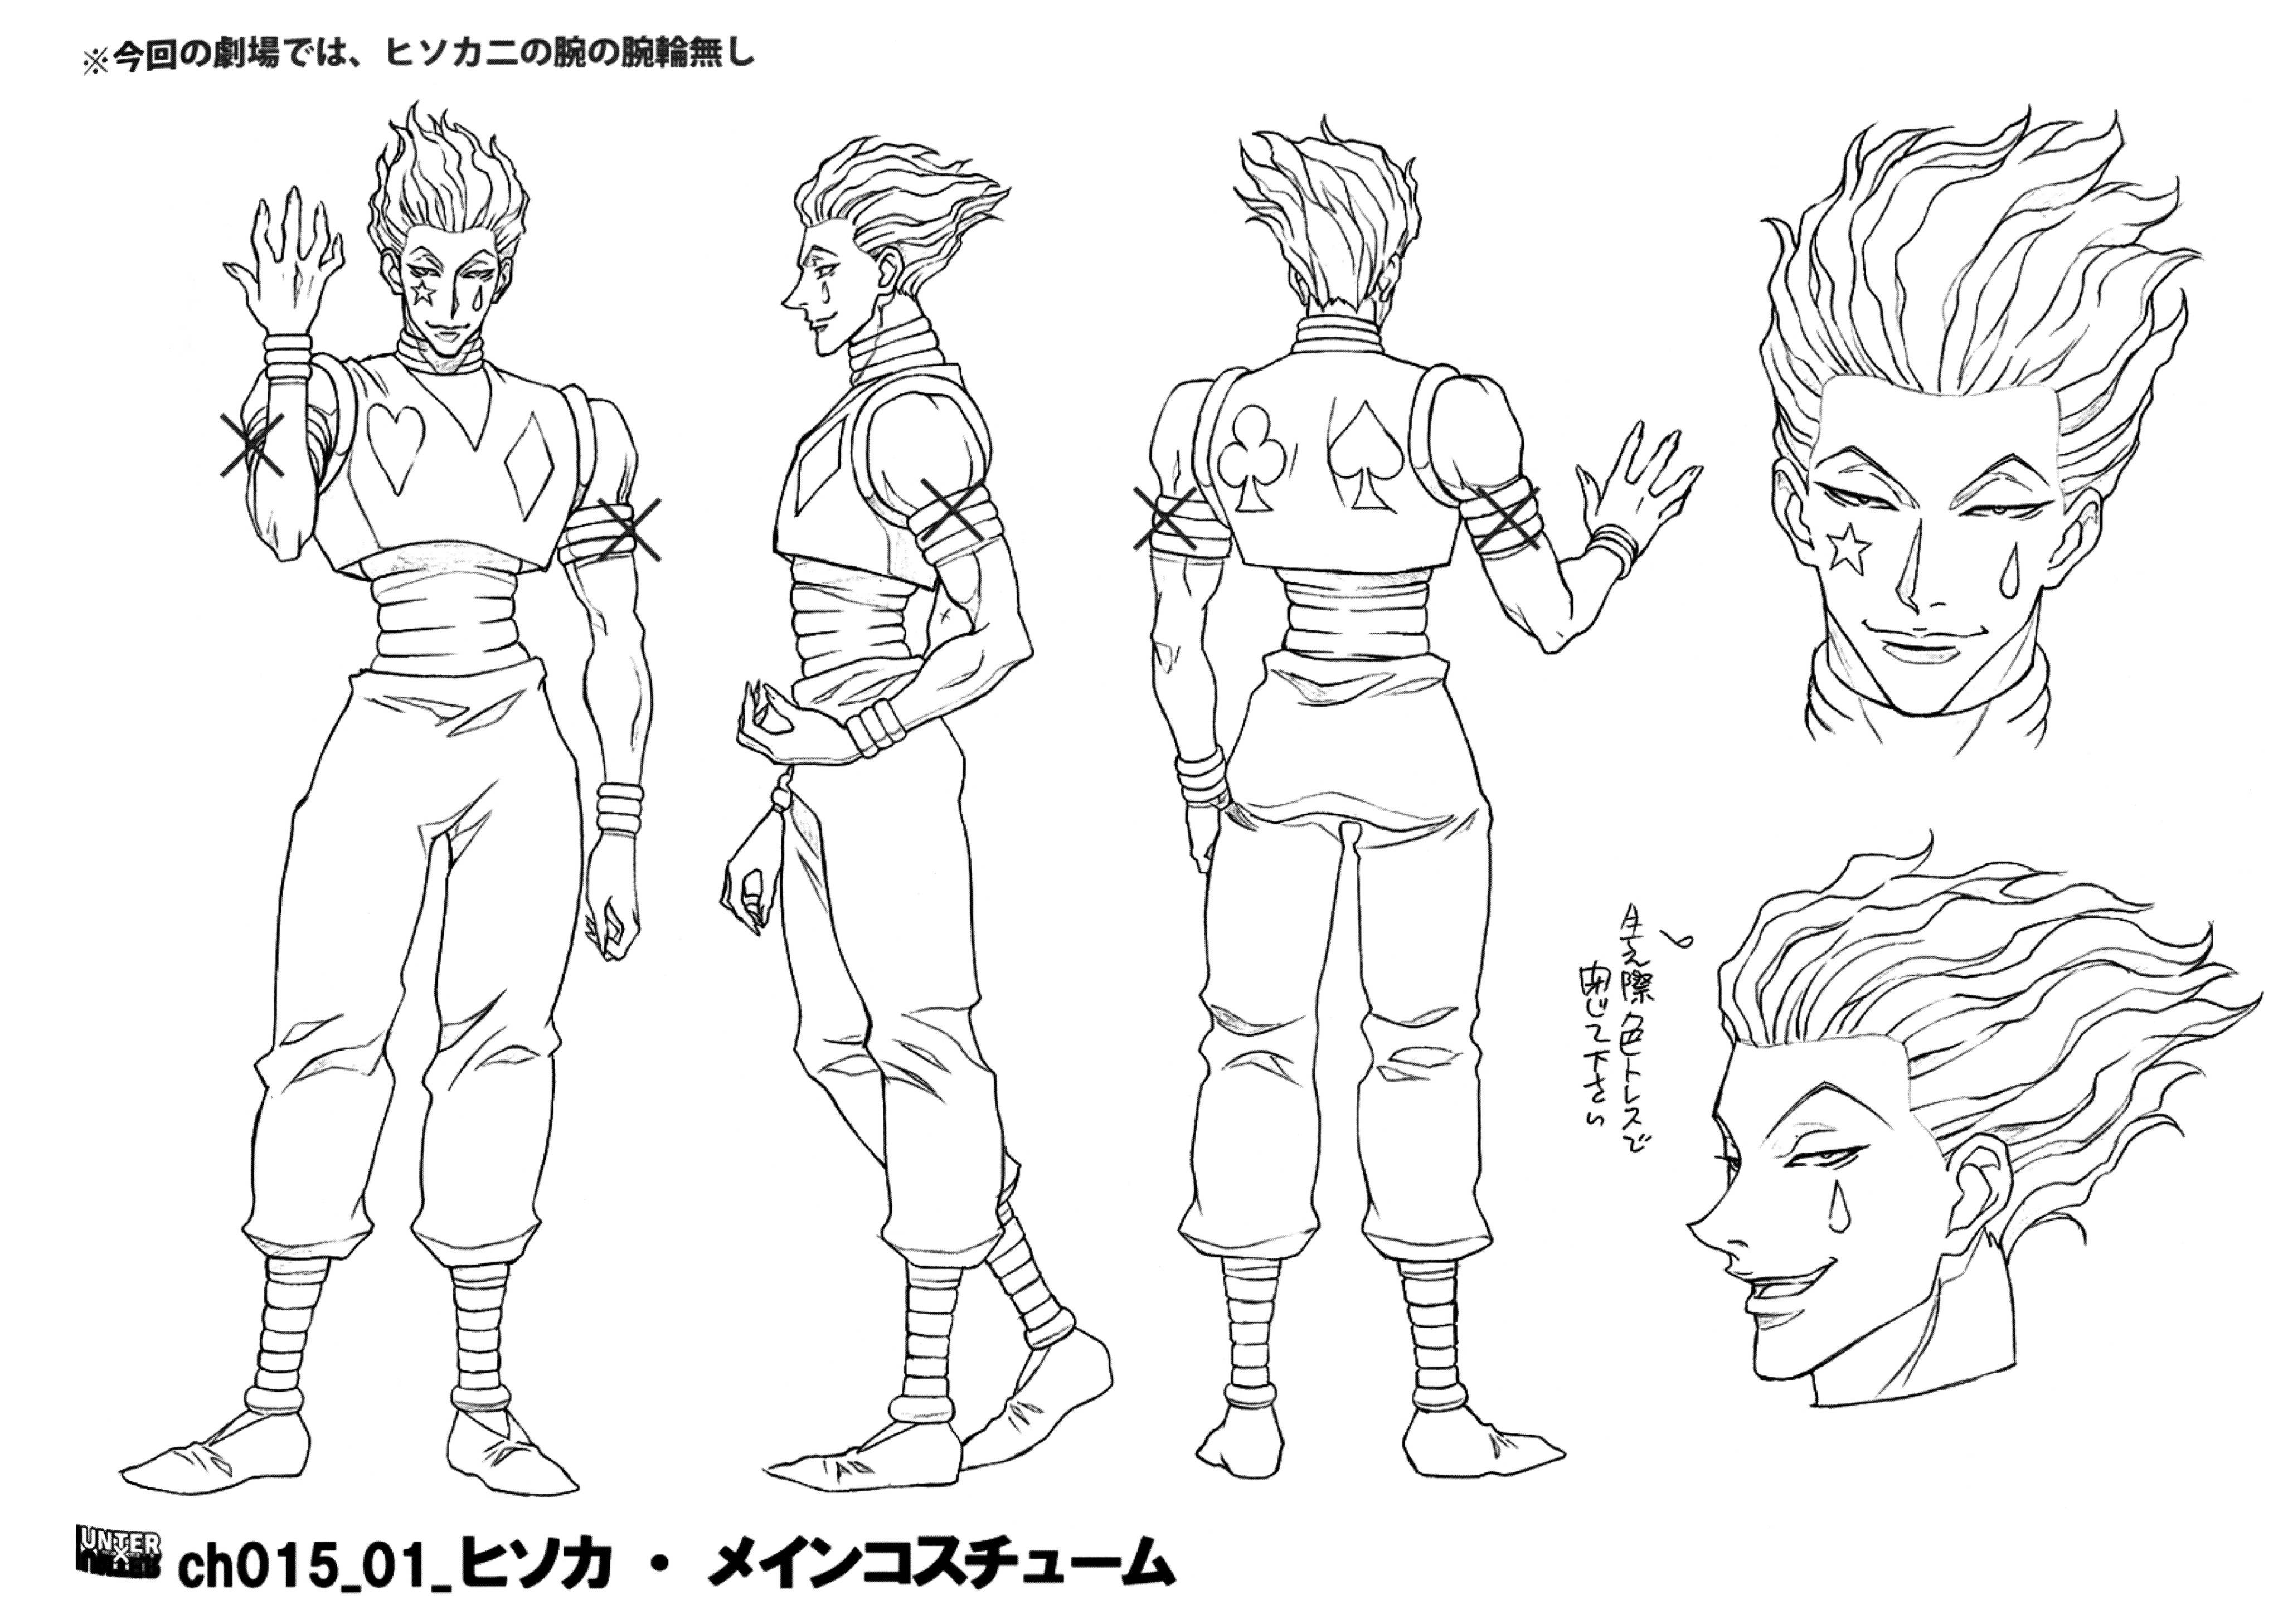 Settei Dreams on X: Color designs from Hunter x Hunter (2011).  #hunterxhunter #ハンターxハンター #hxh #settei #設定 #modelsheet #anime #conceptart  #charactersheet #characterdesign #lineart #design #animation #colordesign   / X